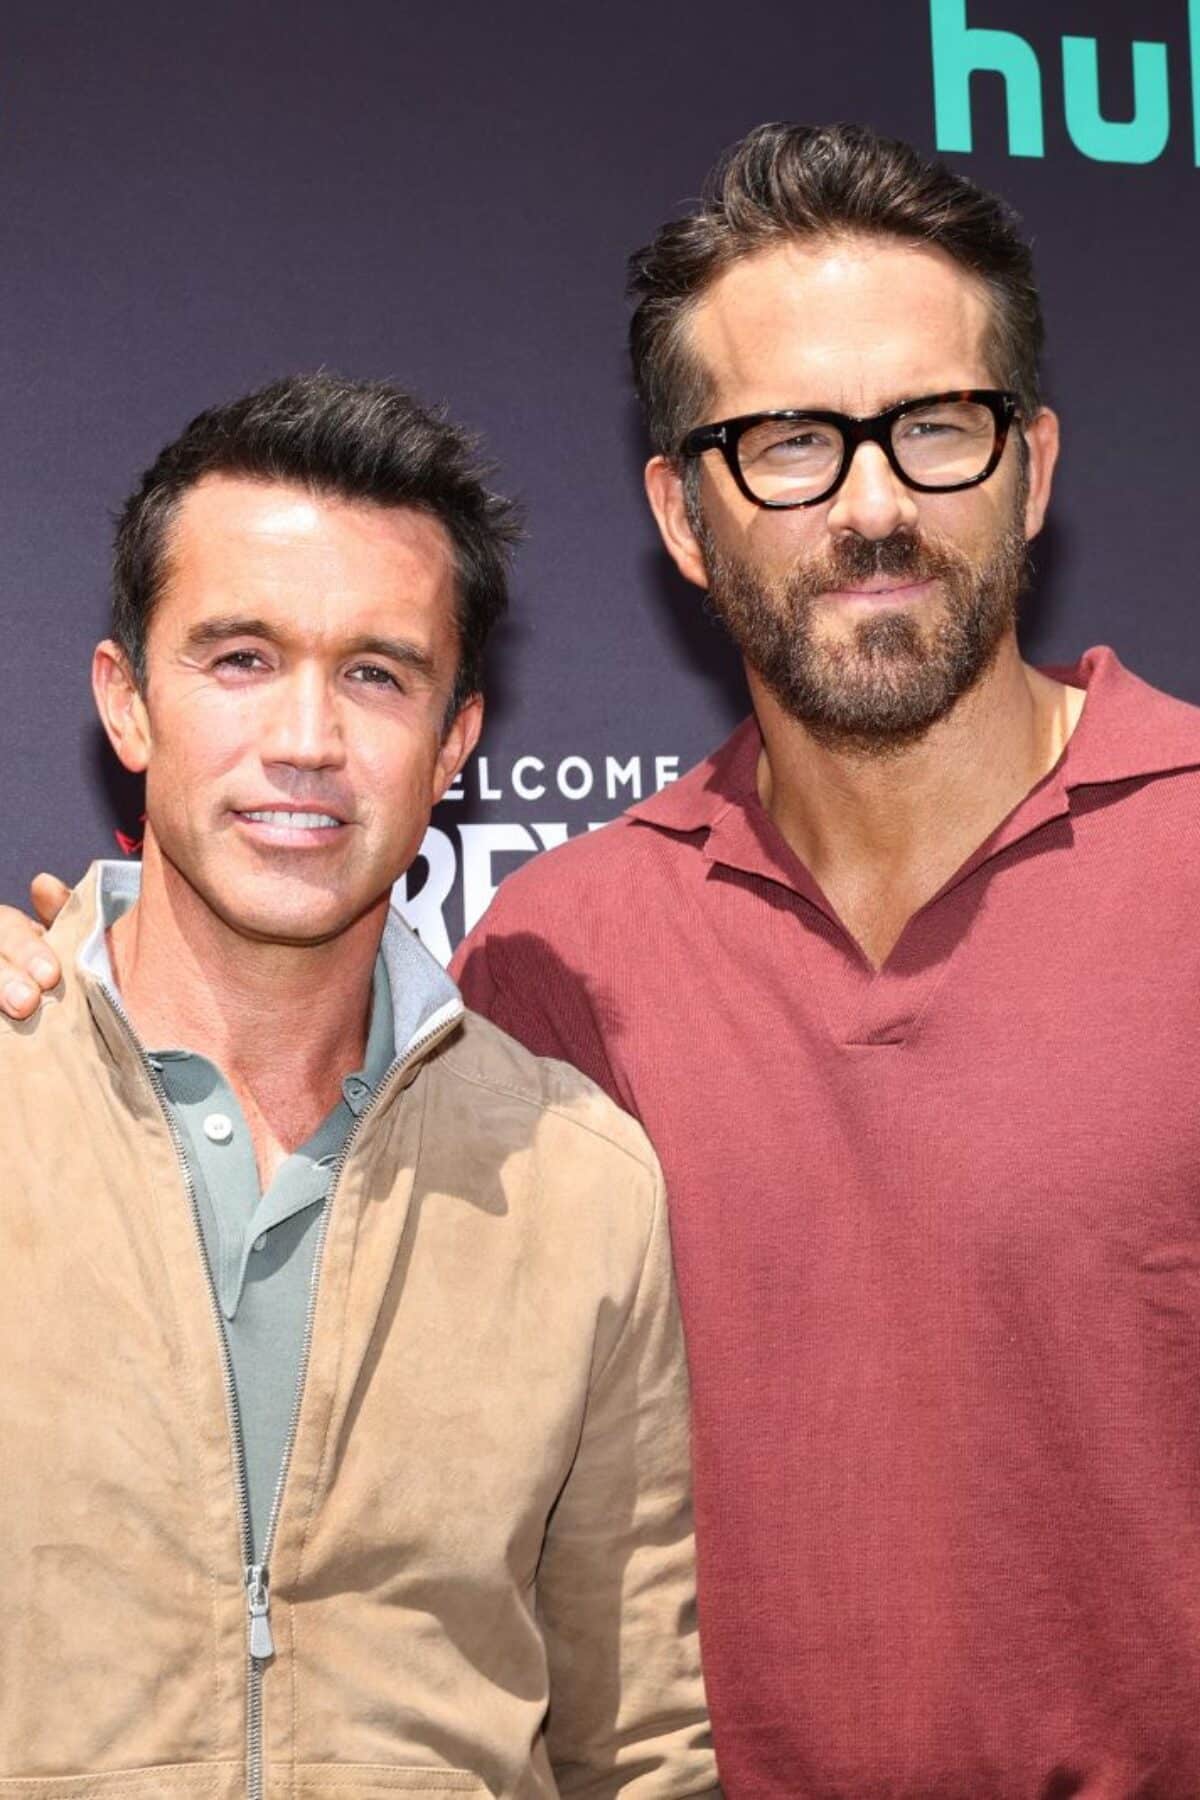 LOS ANGELES, CALIFORNIA - APRIL 29: (L-R) Rob McElhenney and Ryan Reynolds attend the FYC red carpet for FX's 